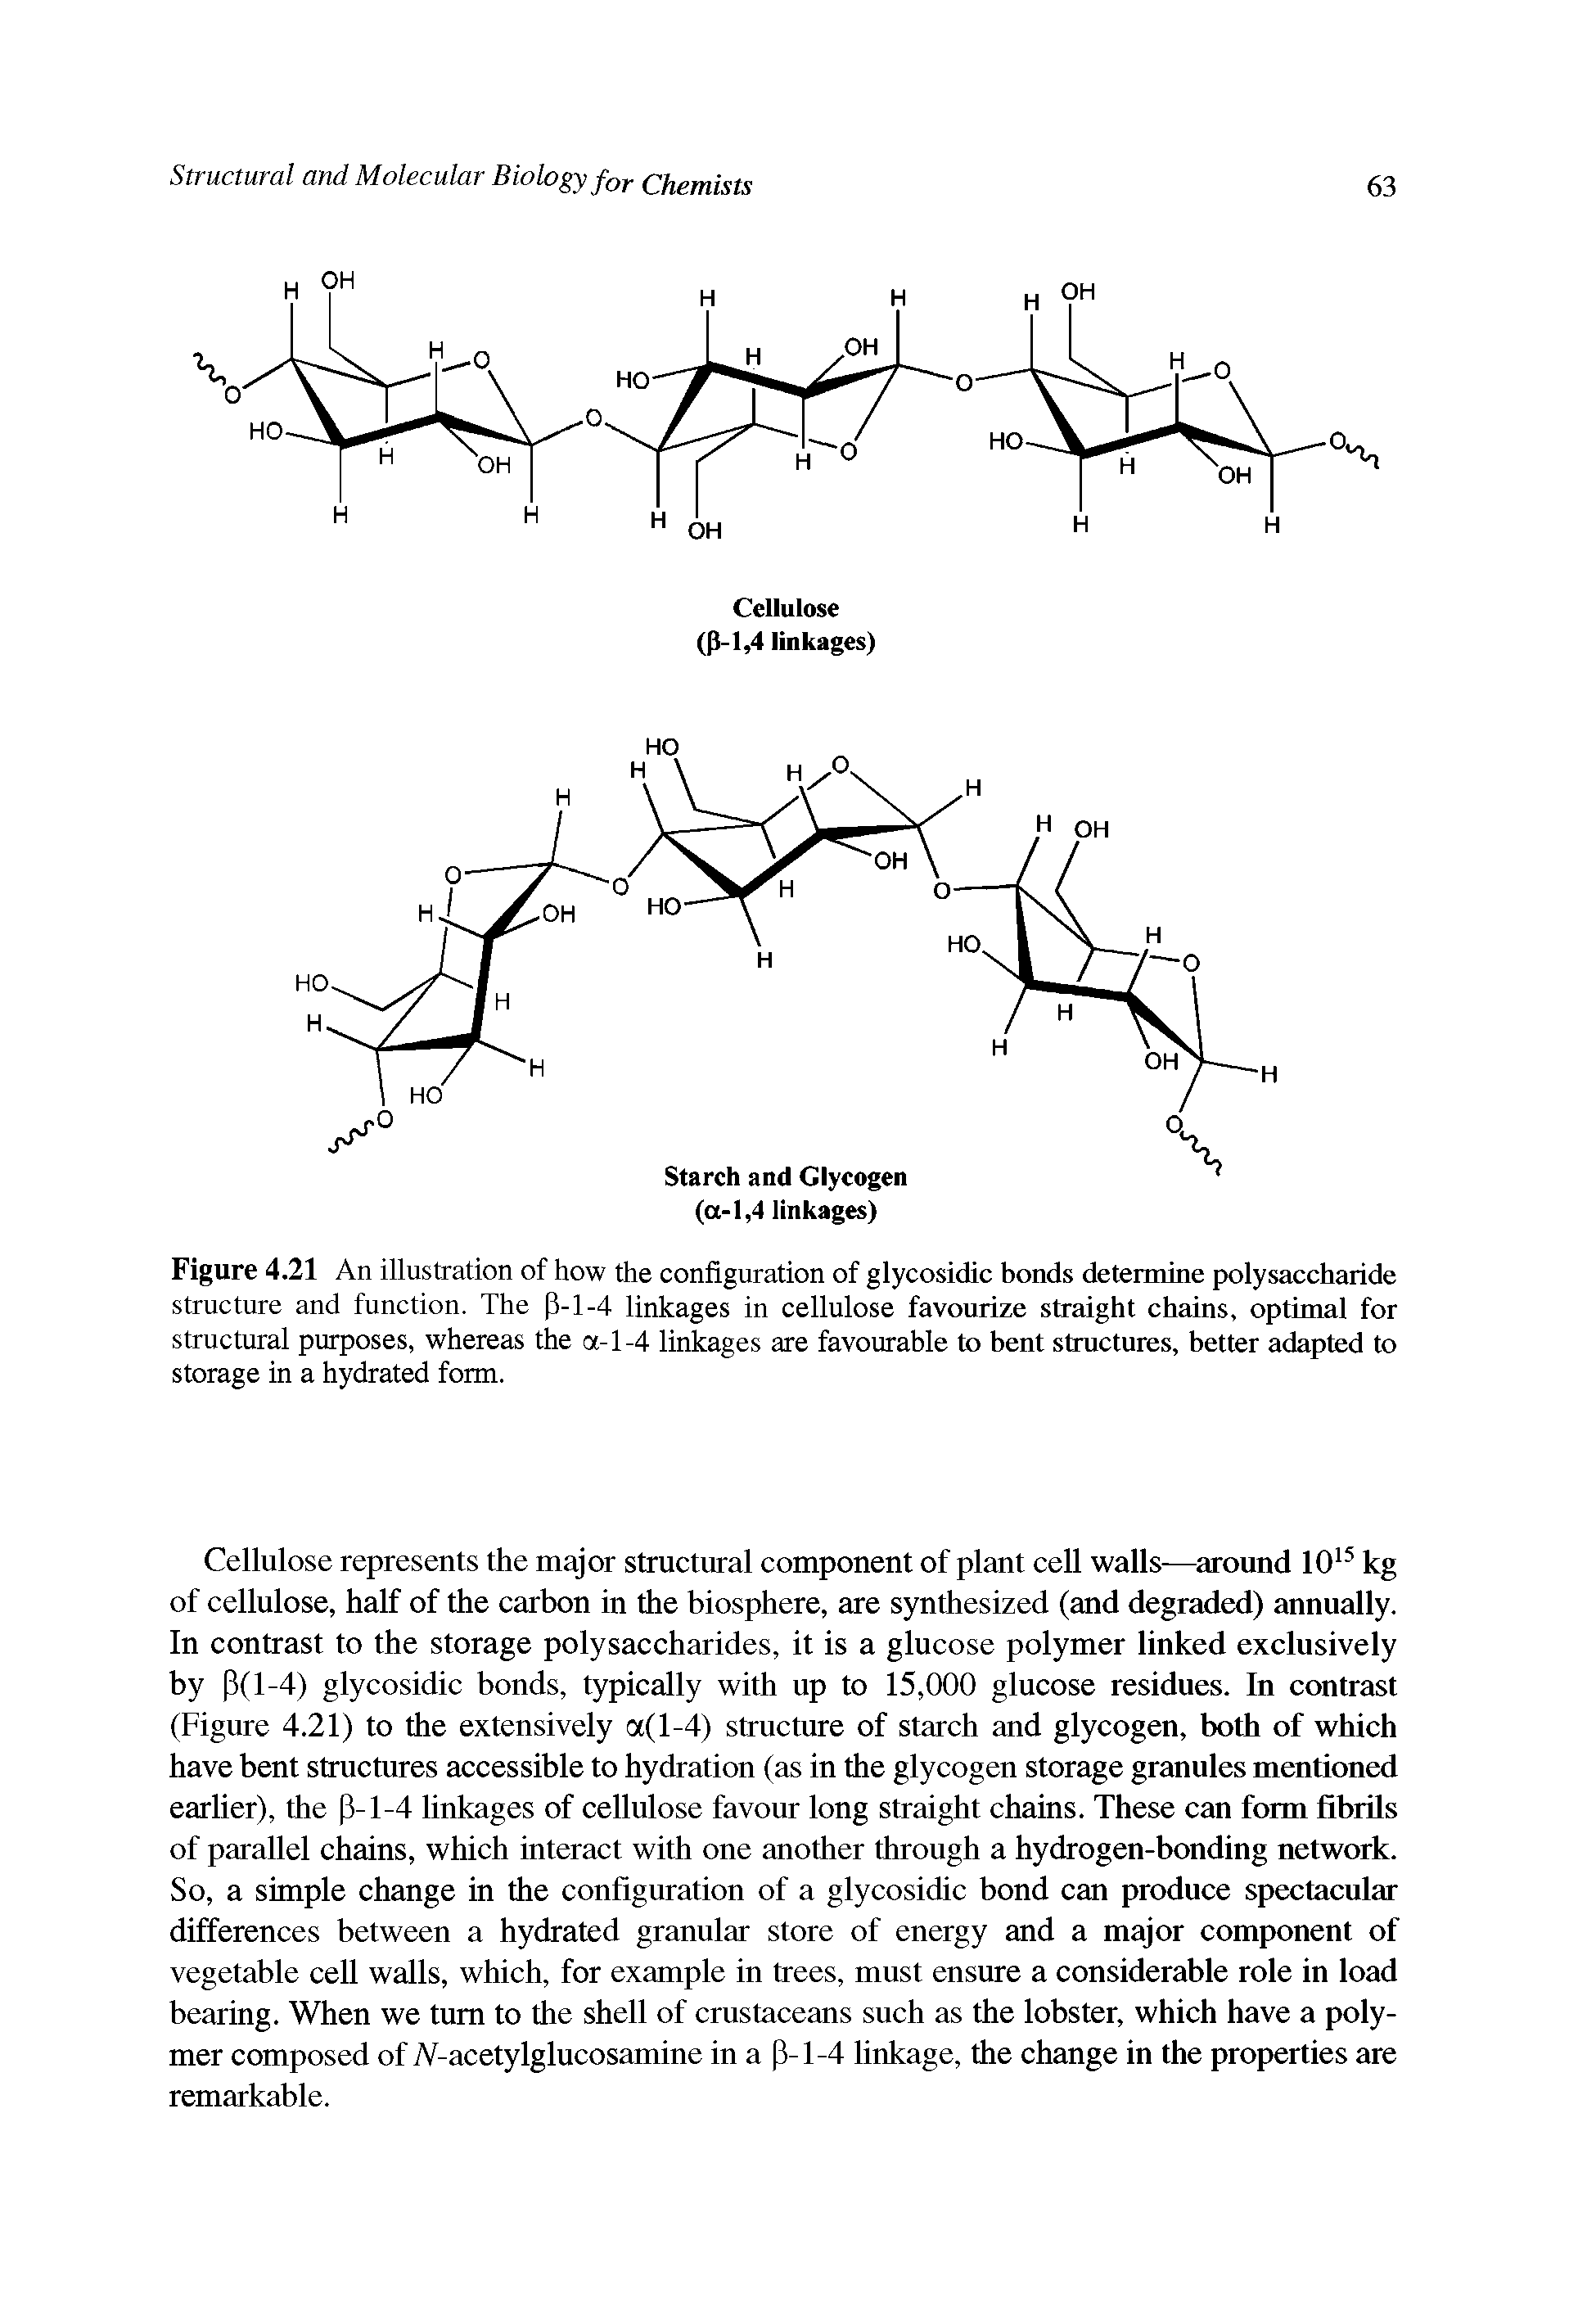 Figure 4.21 An illustration of how the configuration of glycosidic bonds determine polysaccharide structure and function. The P-1-4 linkages in cellulose favourize straight chains, optimal for structural purposes, whereas the a-1-4 linkages are favourable to bent structures, better adapted to storage in a hydrated form.